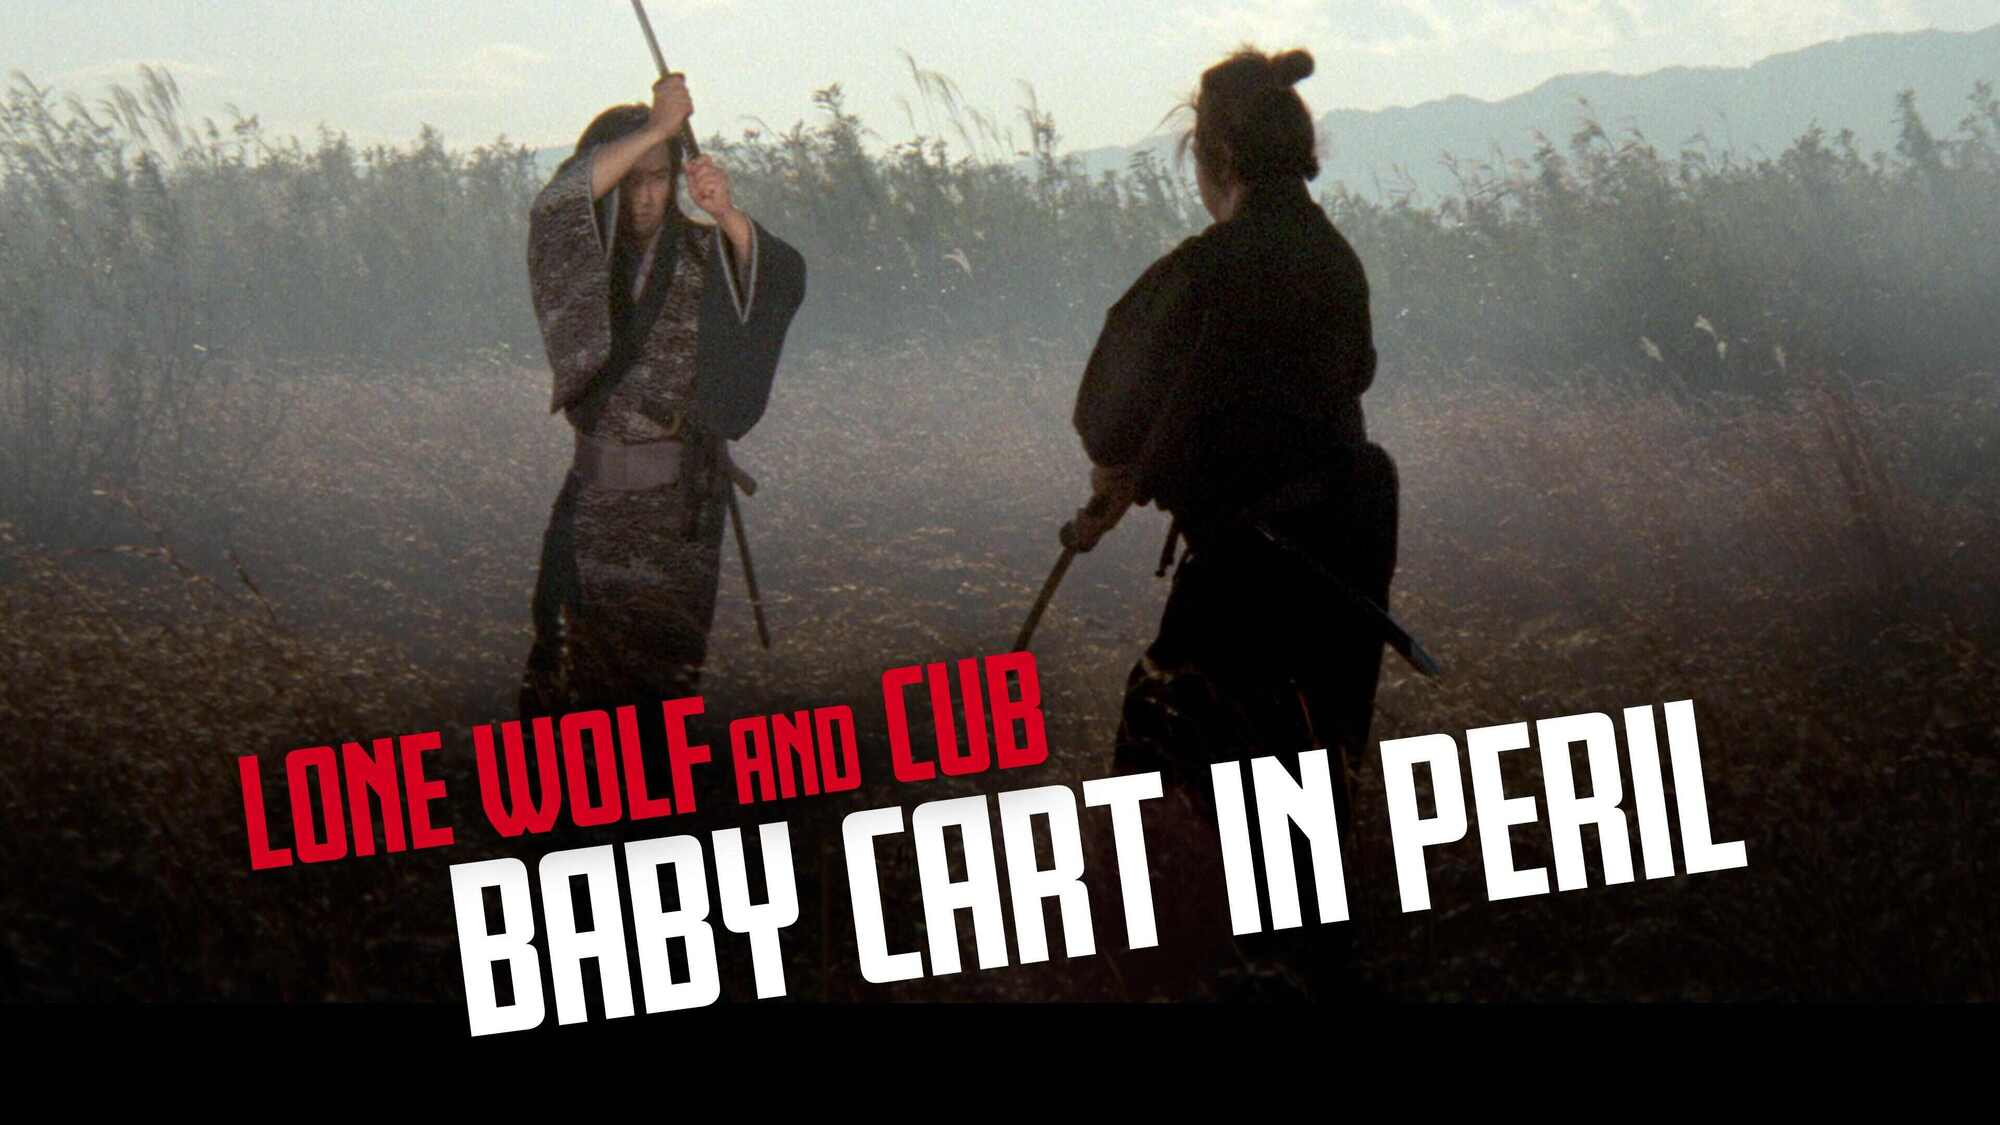 34 Facts About The Movie Lone Wolf And Cub: Baby Cart In Peril 